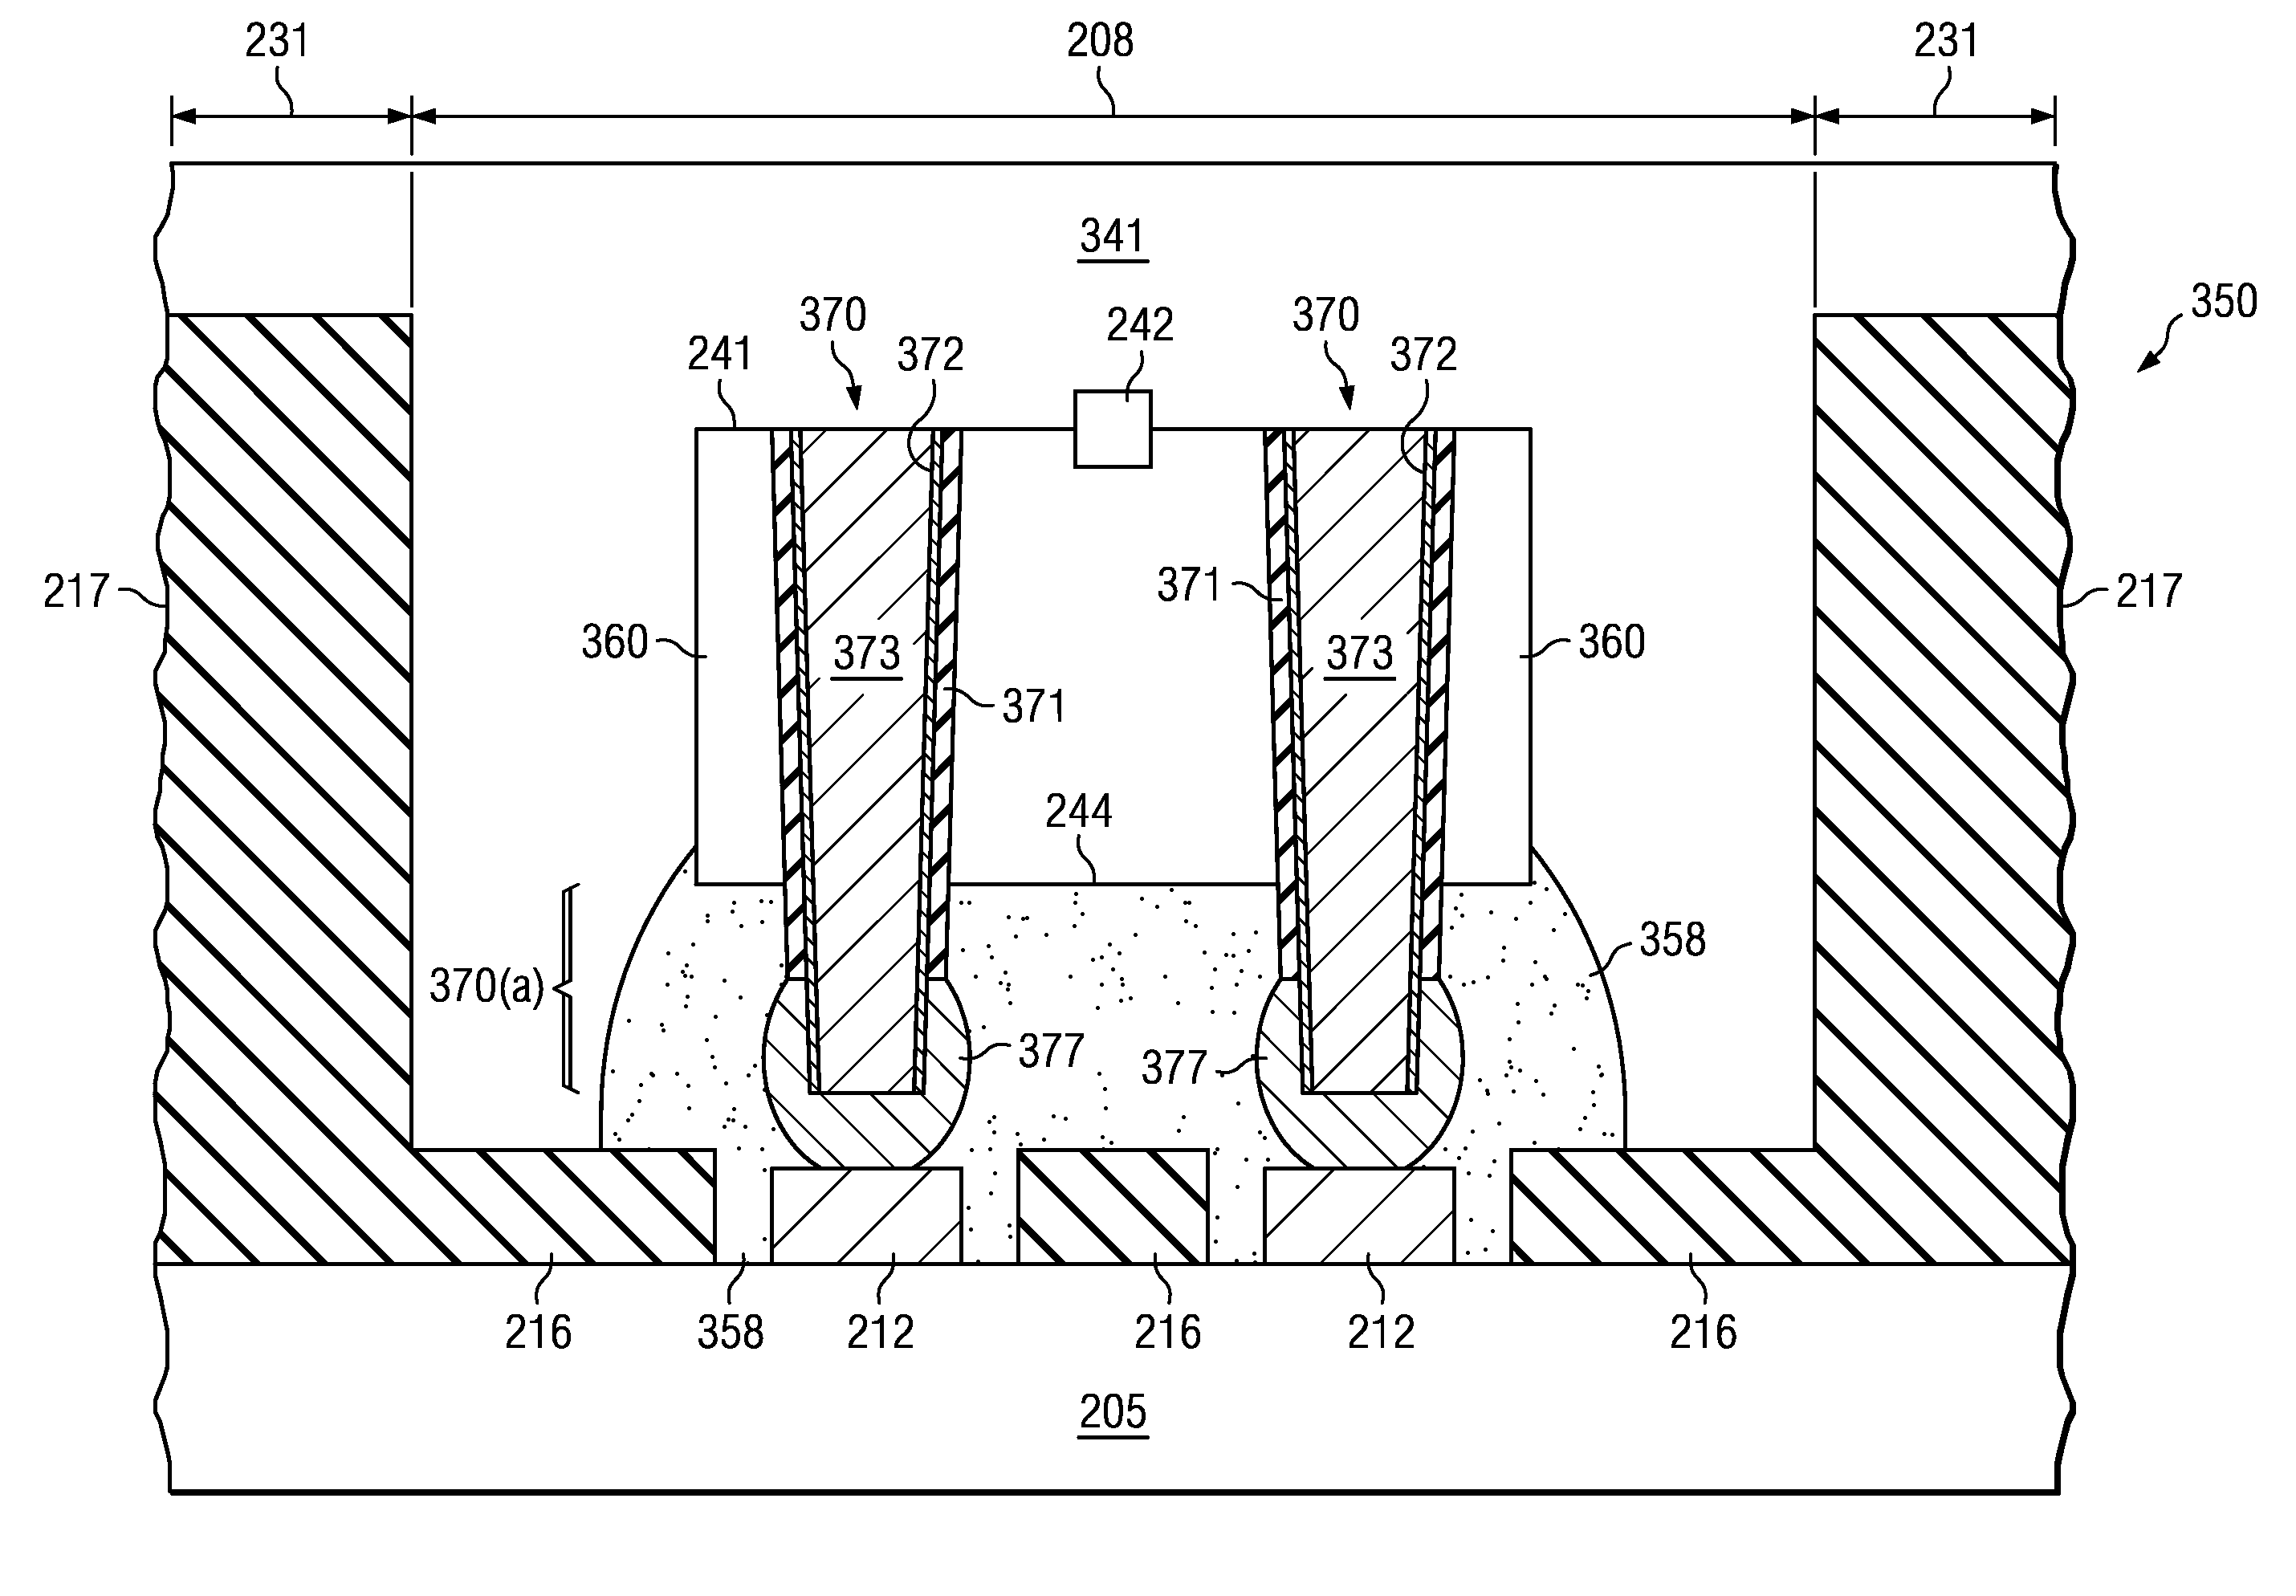 Packaged electronic devices having die attach regions with selective thin dielectric layer